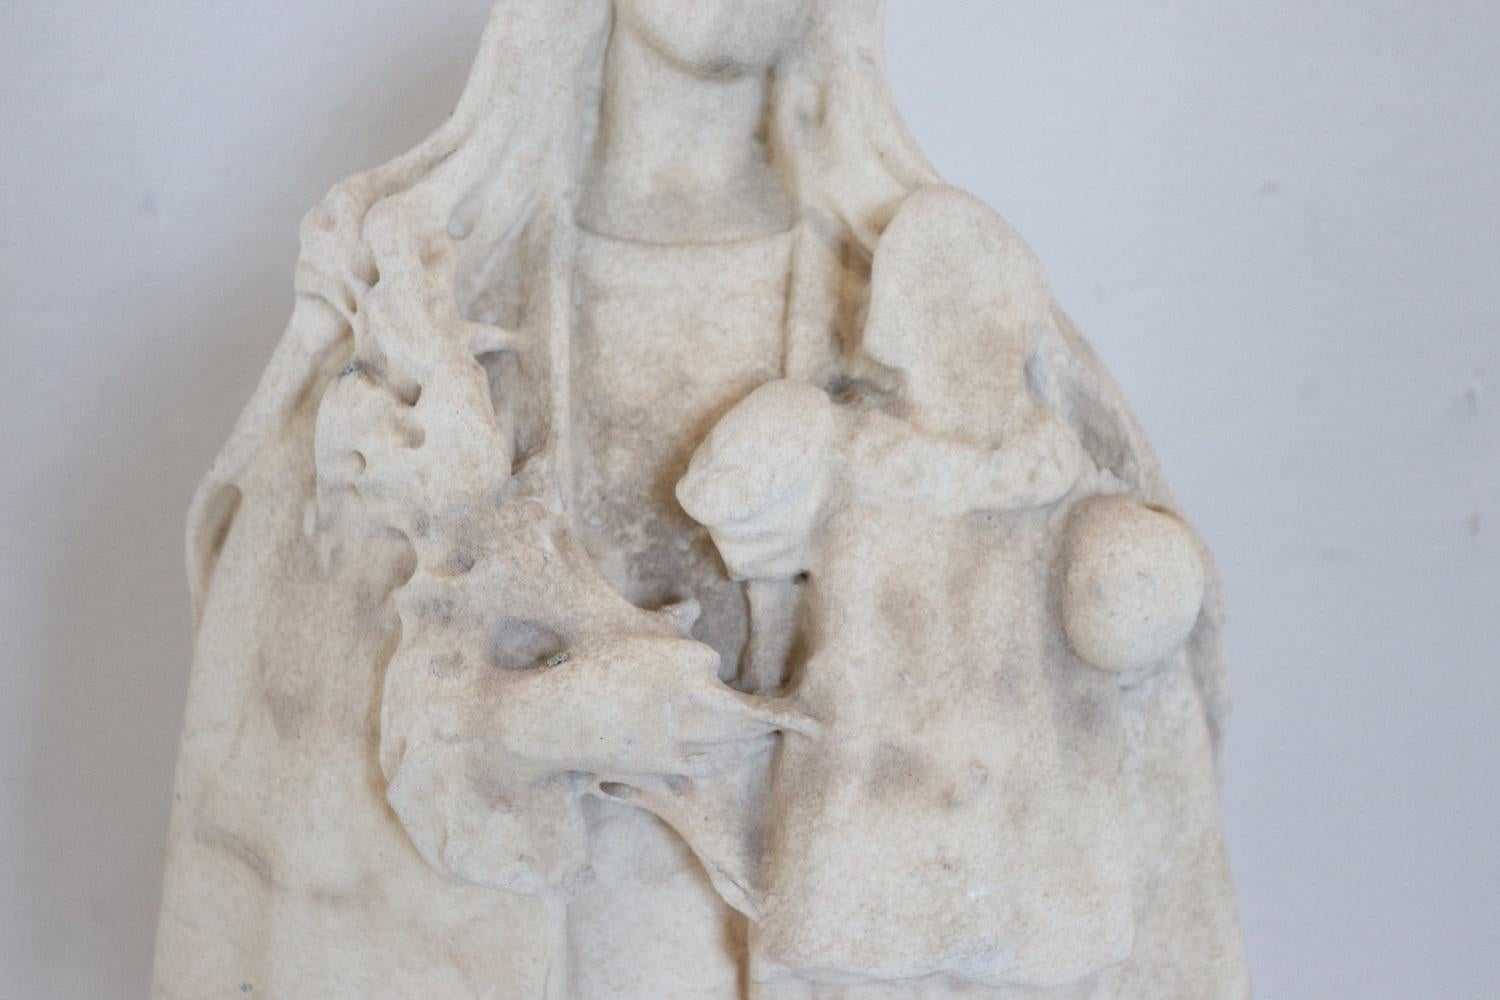 Renaissance Rare 16th Century Sculpture in Precious White Marble of Carrara, Mary with Child For Sale